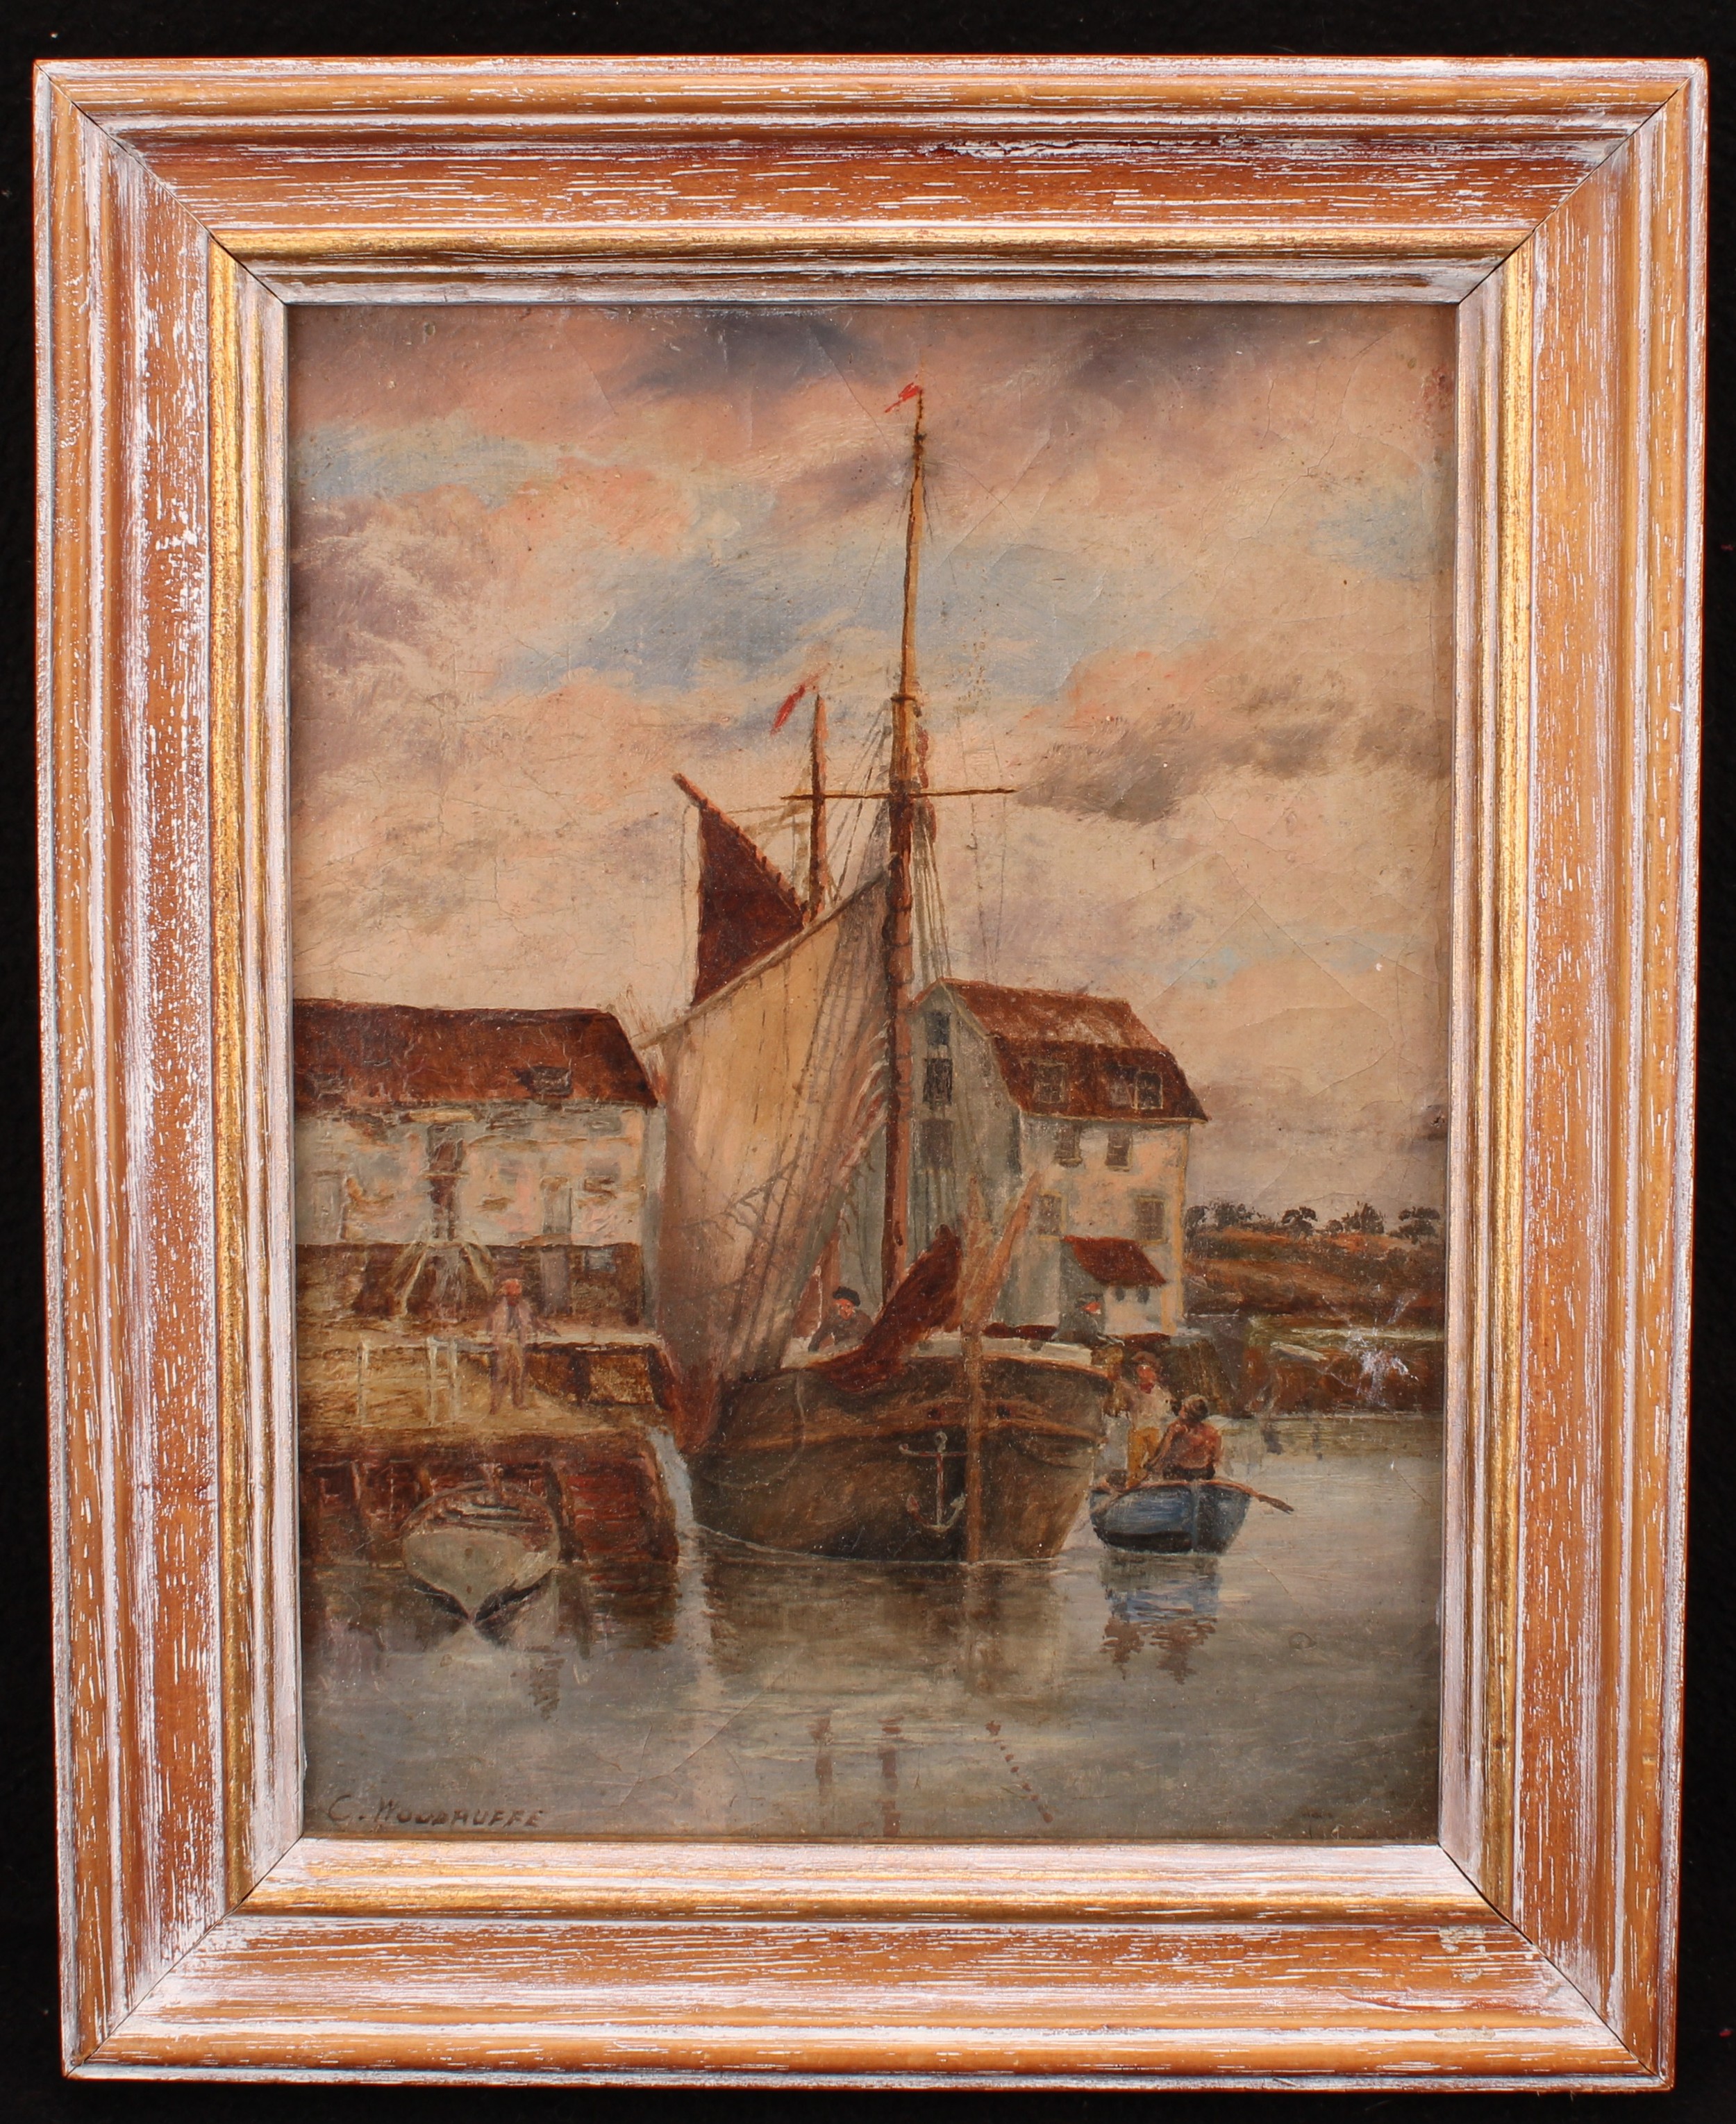 C. Woodruffe (19th century) Fishing Boat in Harbour, signed, oil on canvas, 26.5cm x 20cm - Image 2 of 4